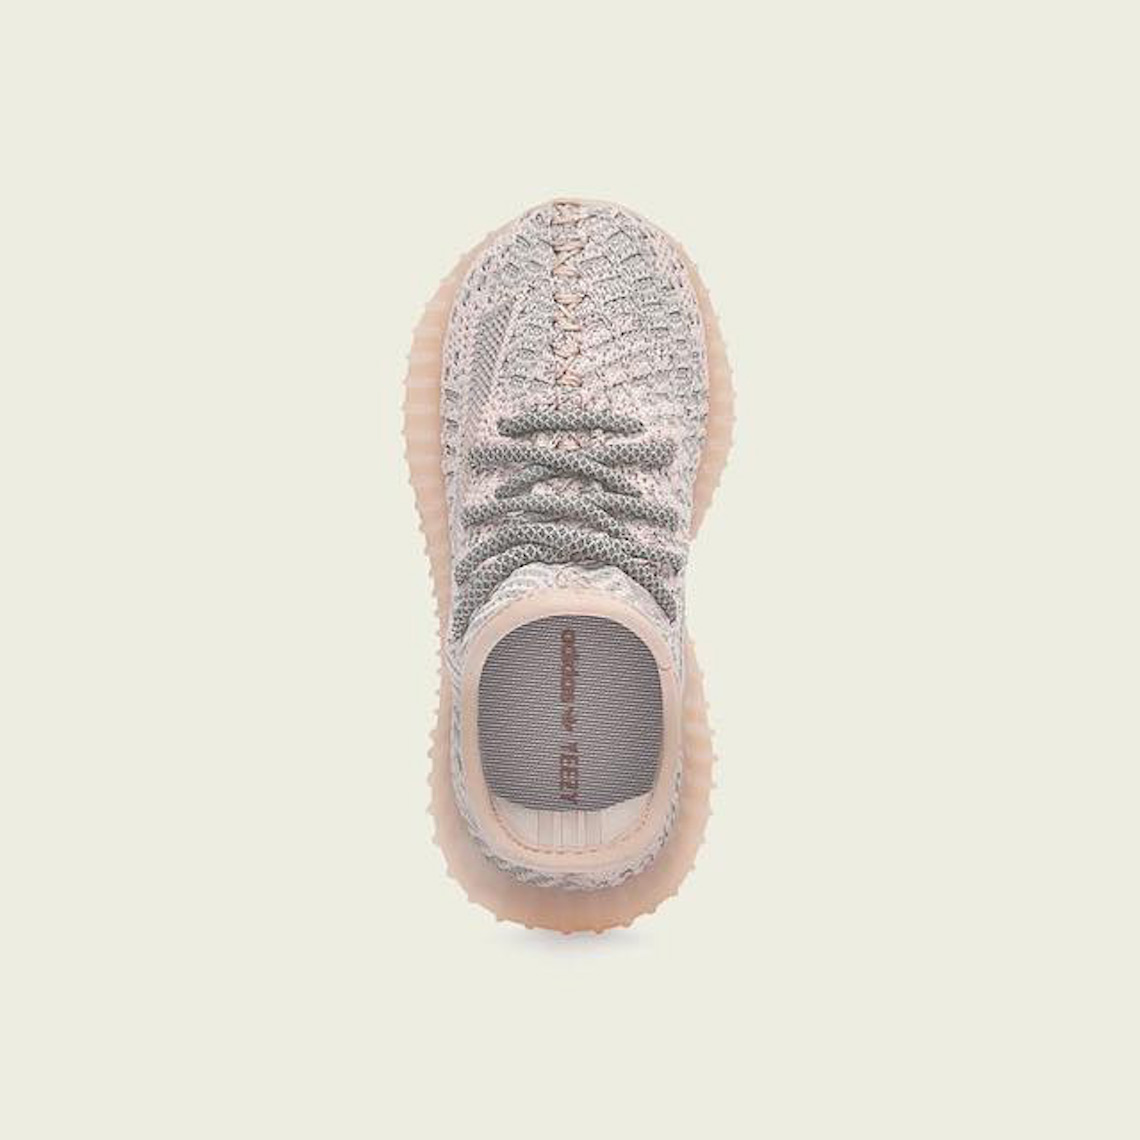 Adidas Yeezy 350 Synth Release Date 6